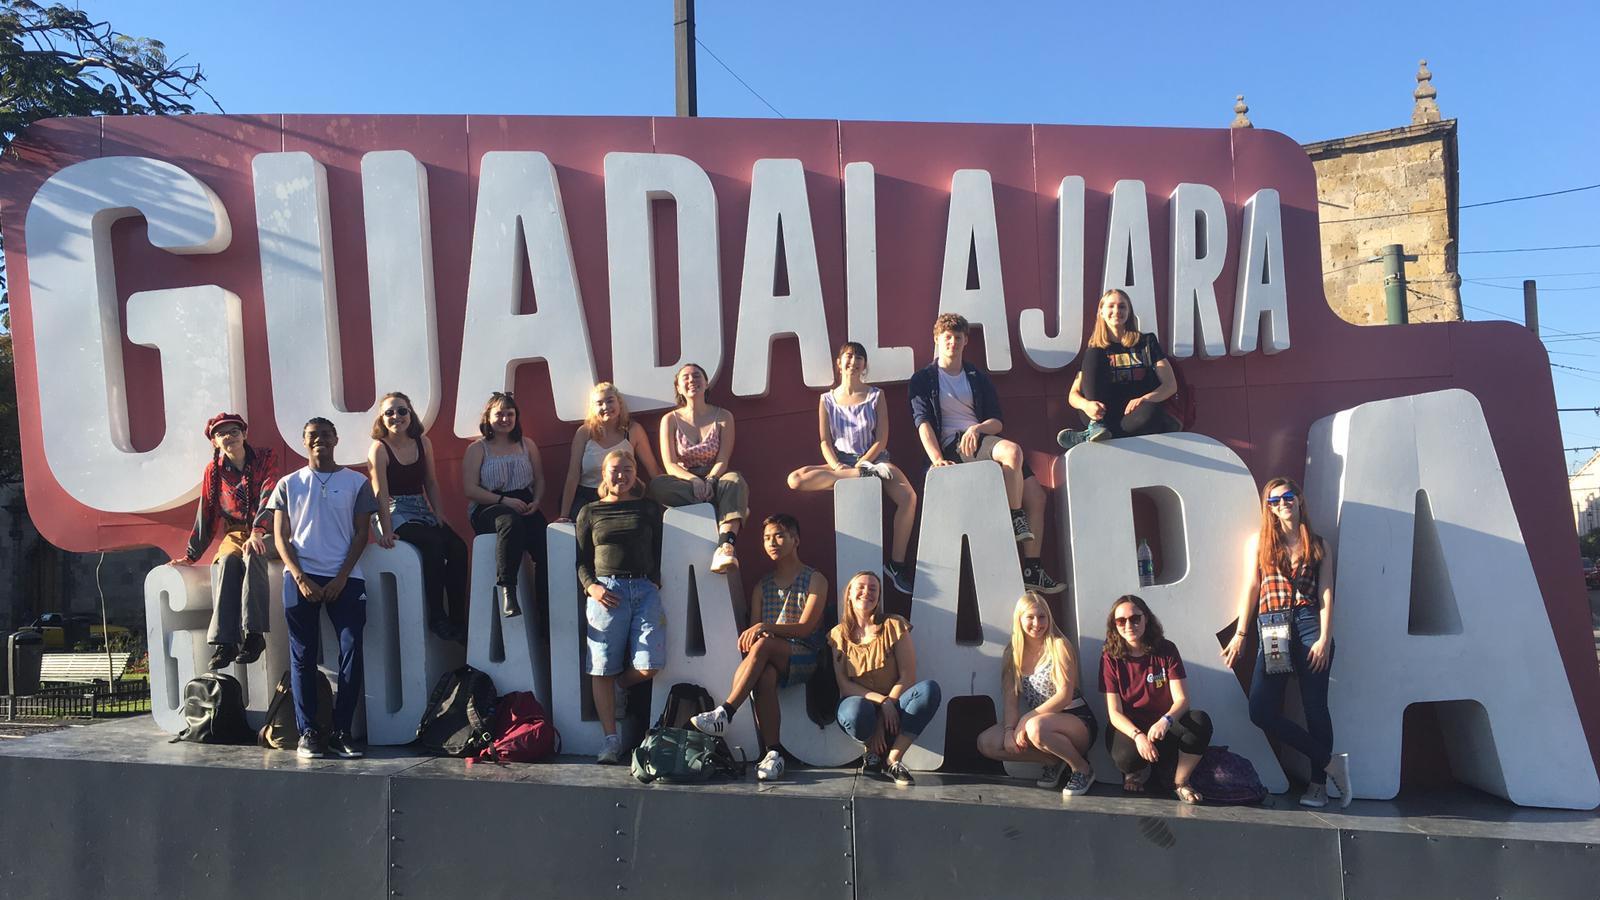 A group of students in front of a large Guadalajara sign.